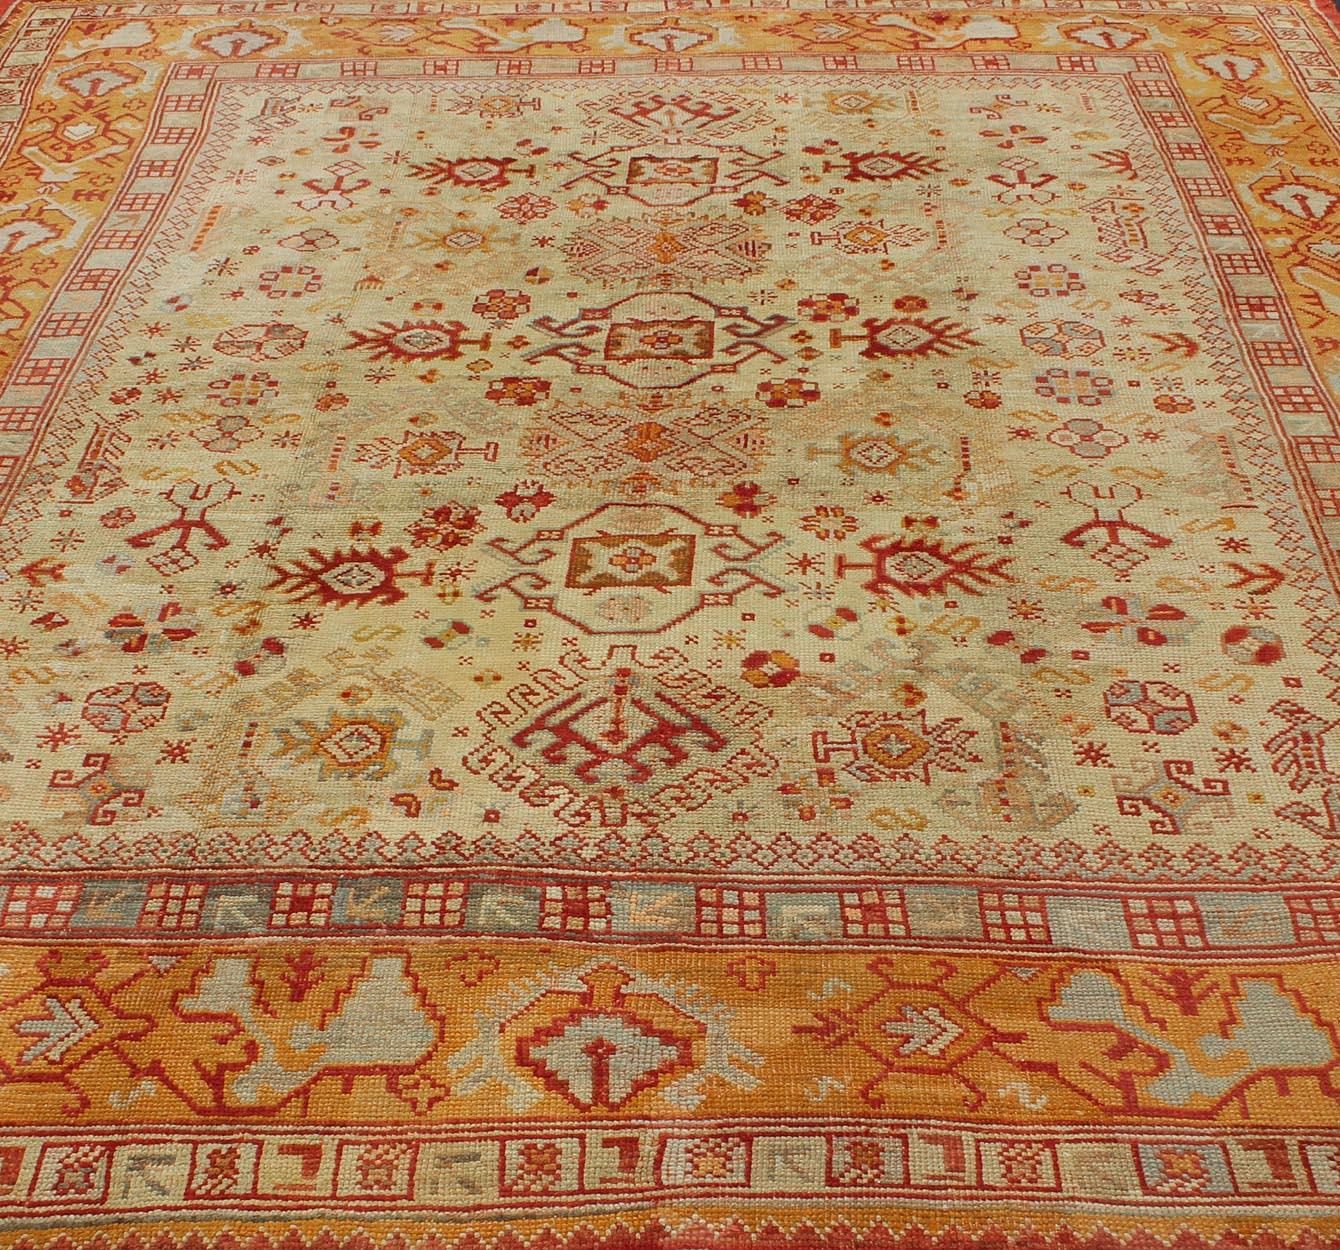 Antique Turkish Oushak Carpet With All-Over Design In Red, Taupe, and Orange For Sale 3